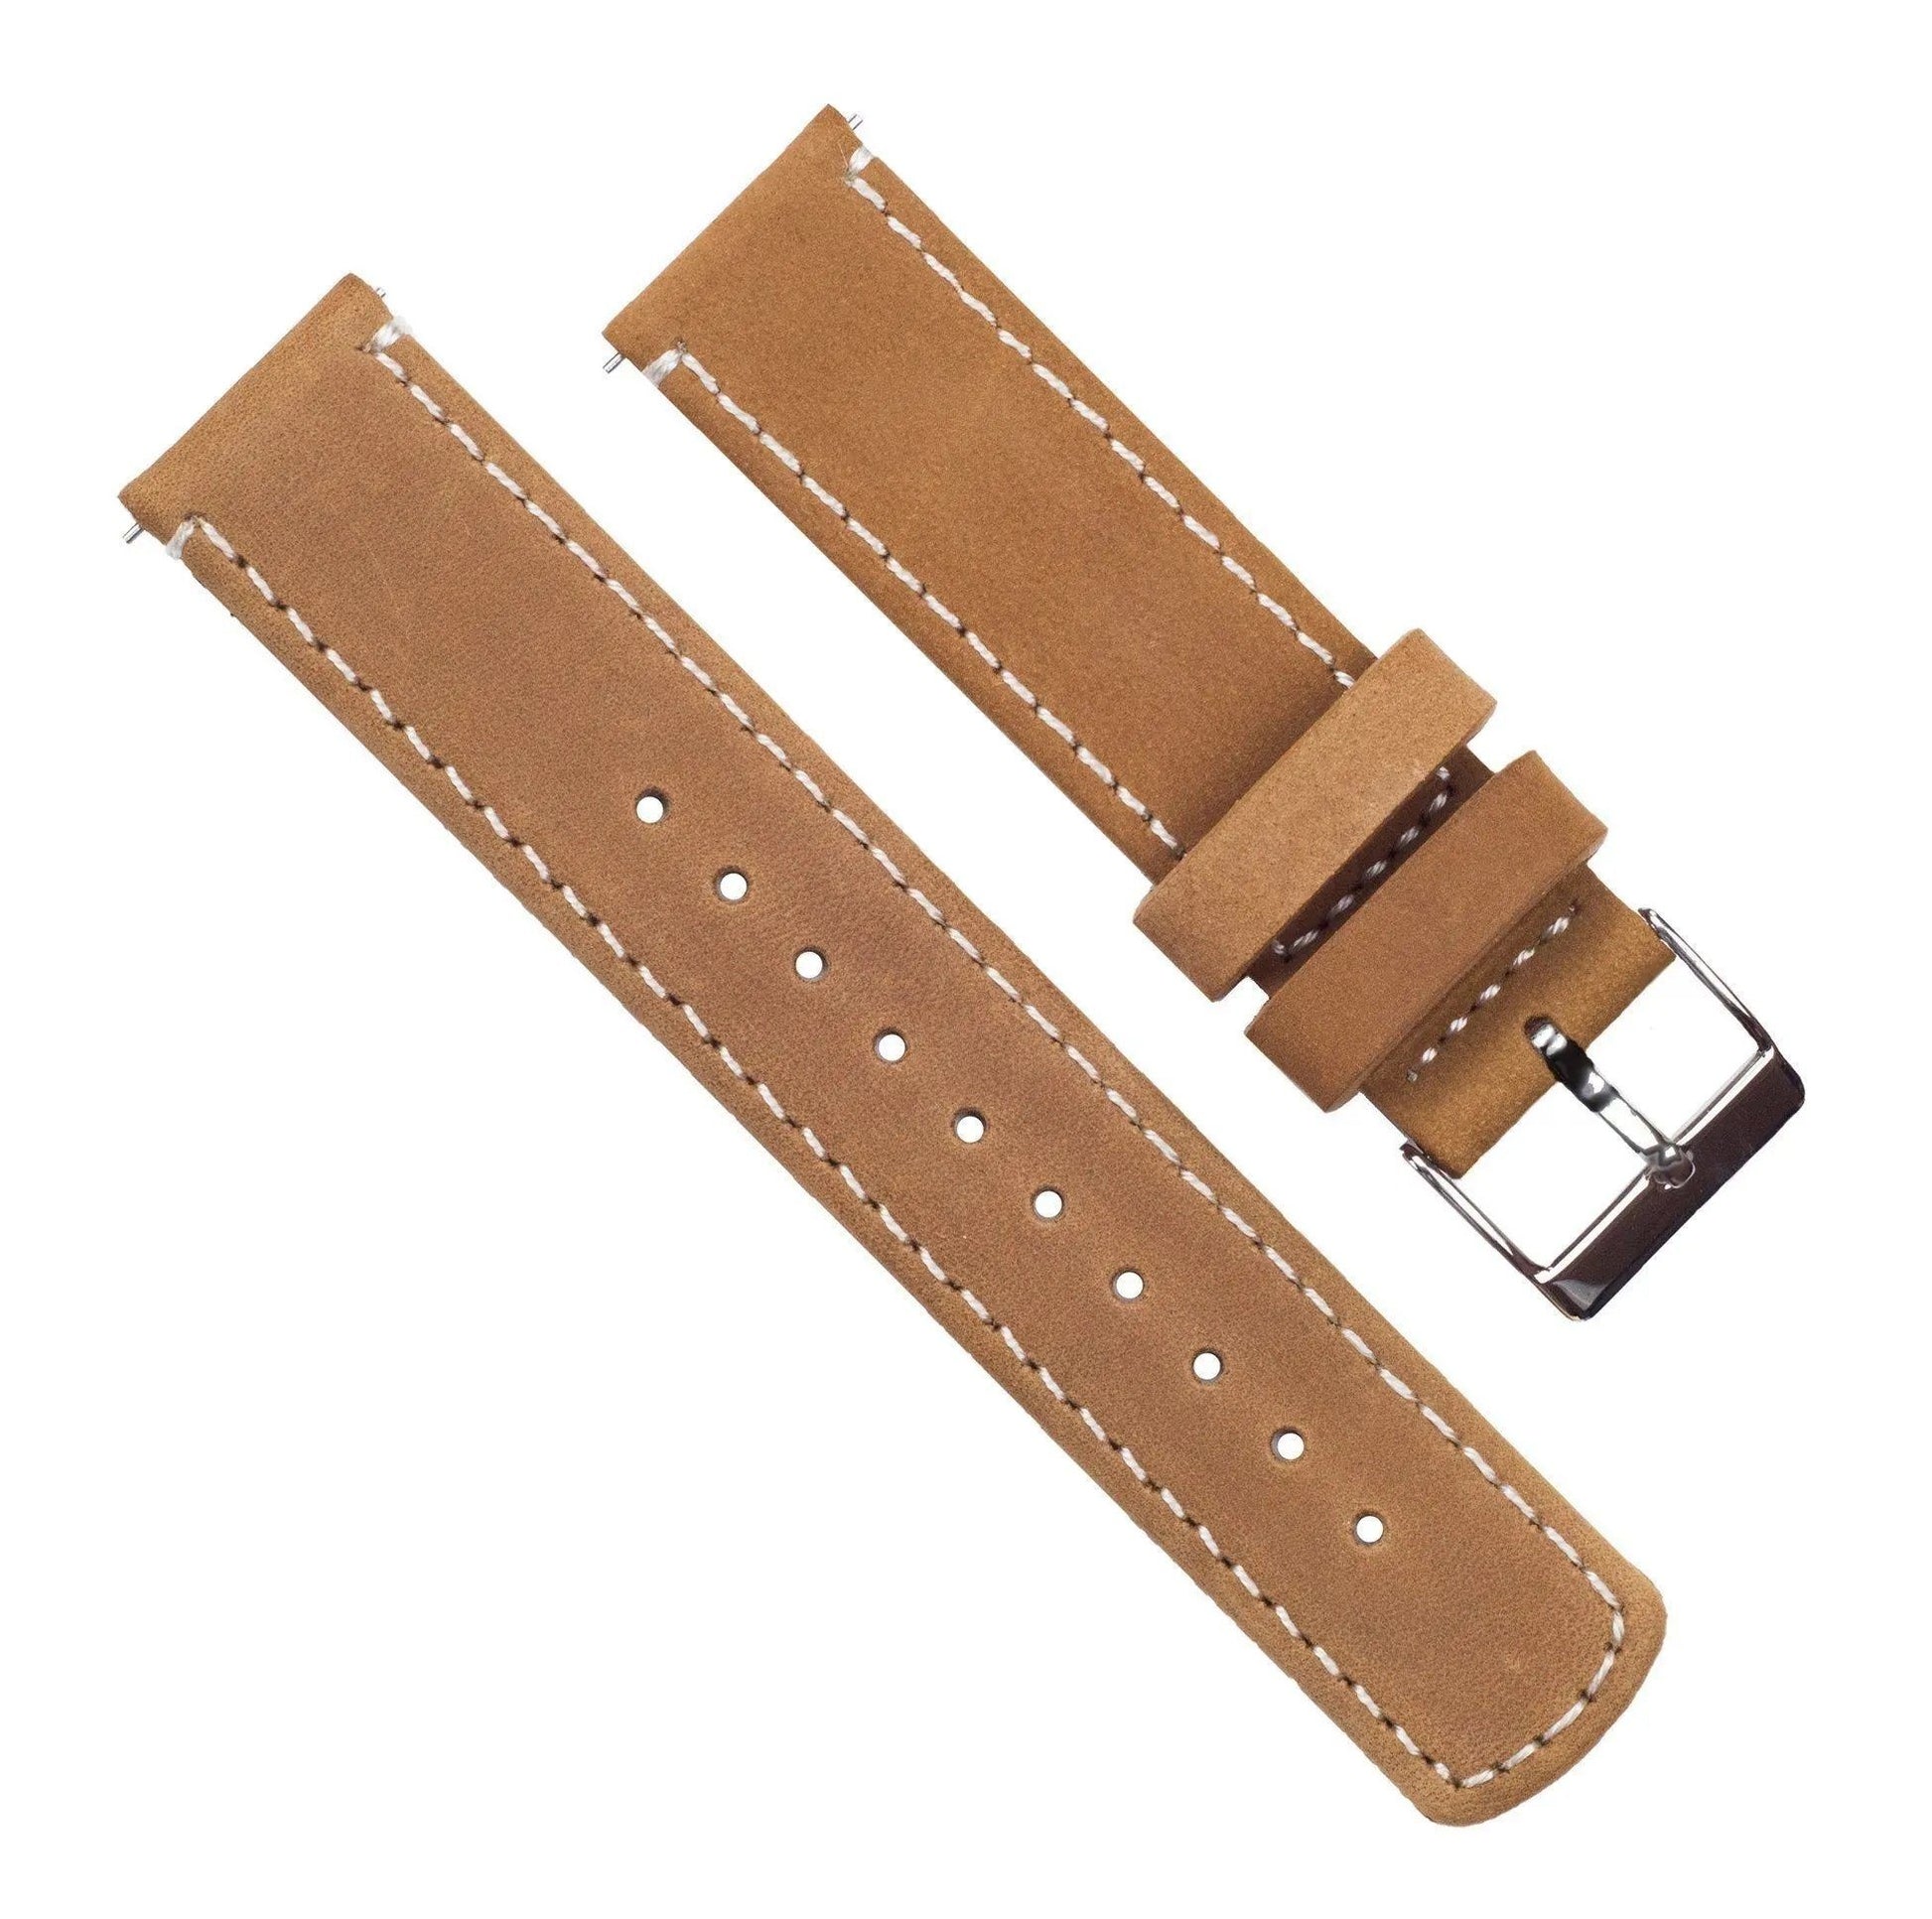 Amazfit Bip | Gingerbread Brown Leather & Linen White Stitching - Barton Watch Bands